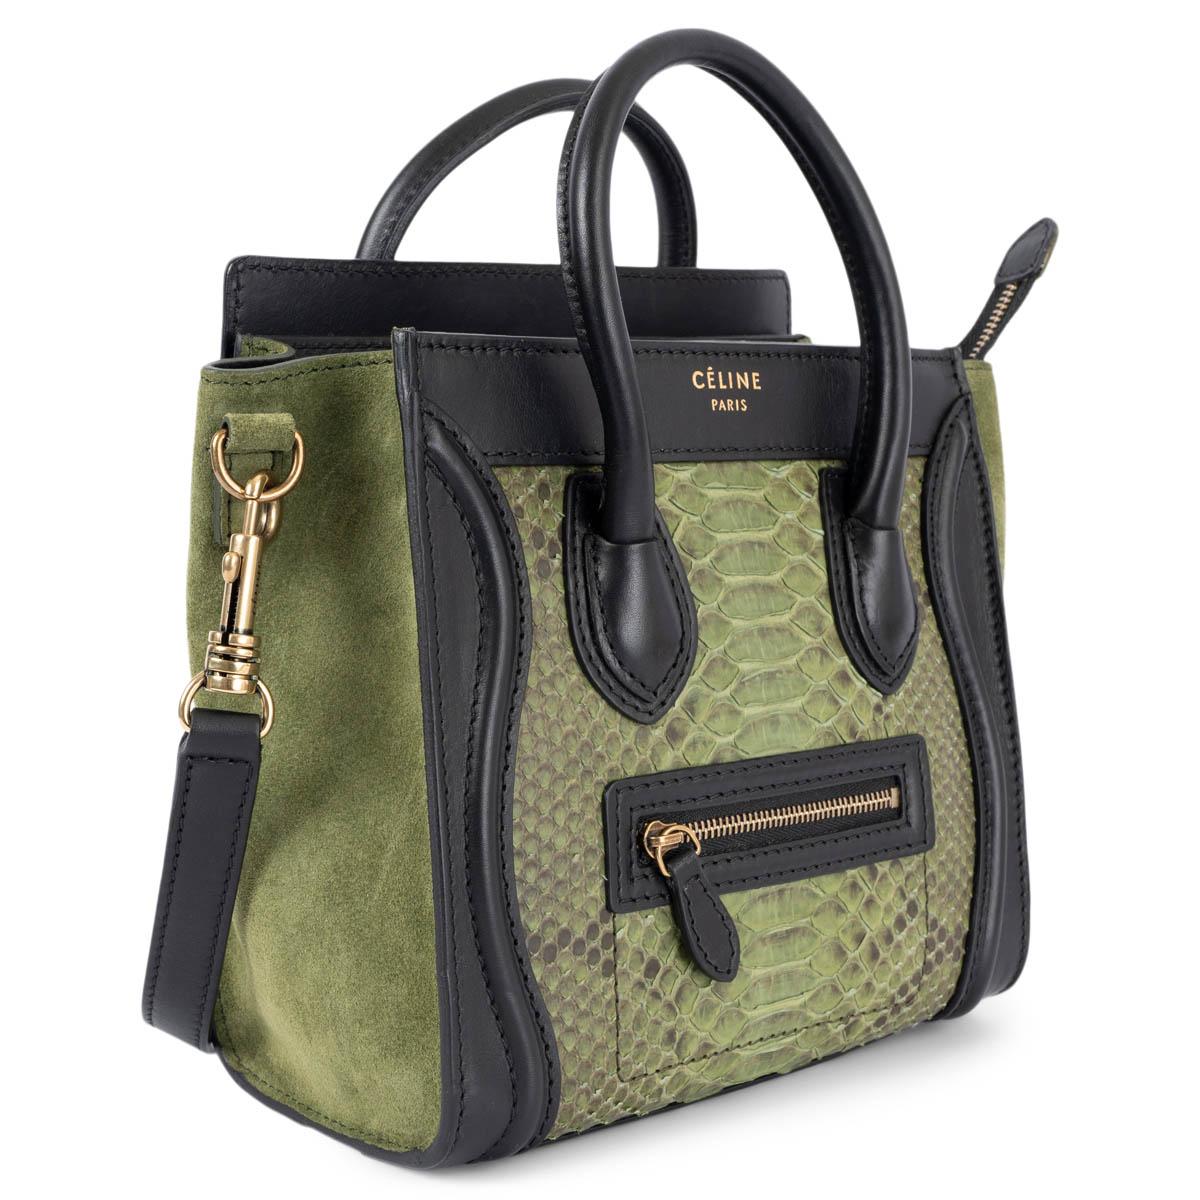 100% authentic Céline Nano Luggage in green pytohn, sude and black calfskin. The design features gold-tone hardware, opens with a zipper on top and is lined in black leather with one flat pocket against the back and a small zip pocket on the front.